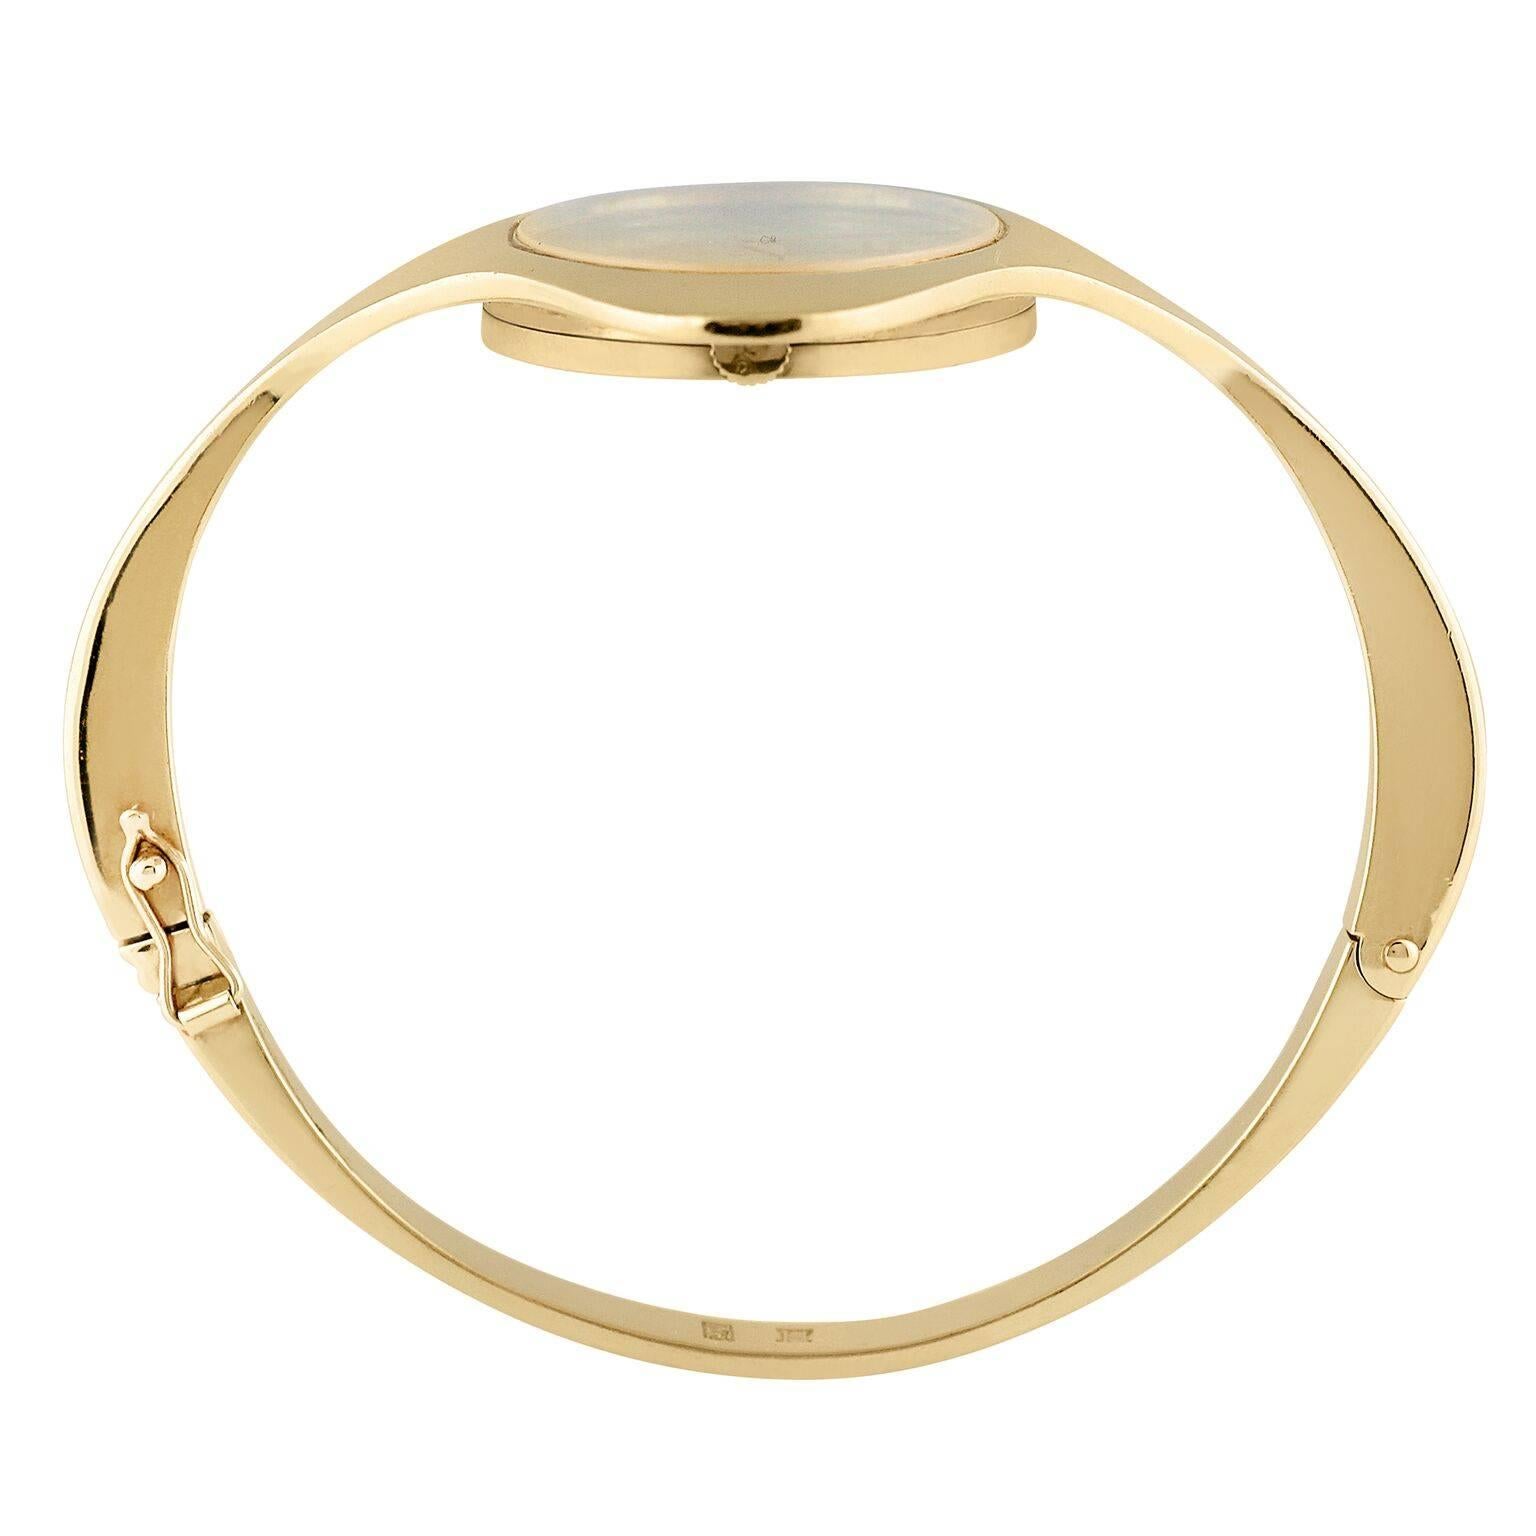 Lady's Yellow Gold Chopard bangle bracelet watch with Nephrite jade dial. Highly unique Space-Age design. Bracelet opens with hinged clasp on side. Mechanical Wind.